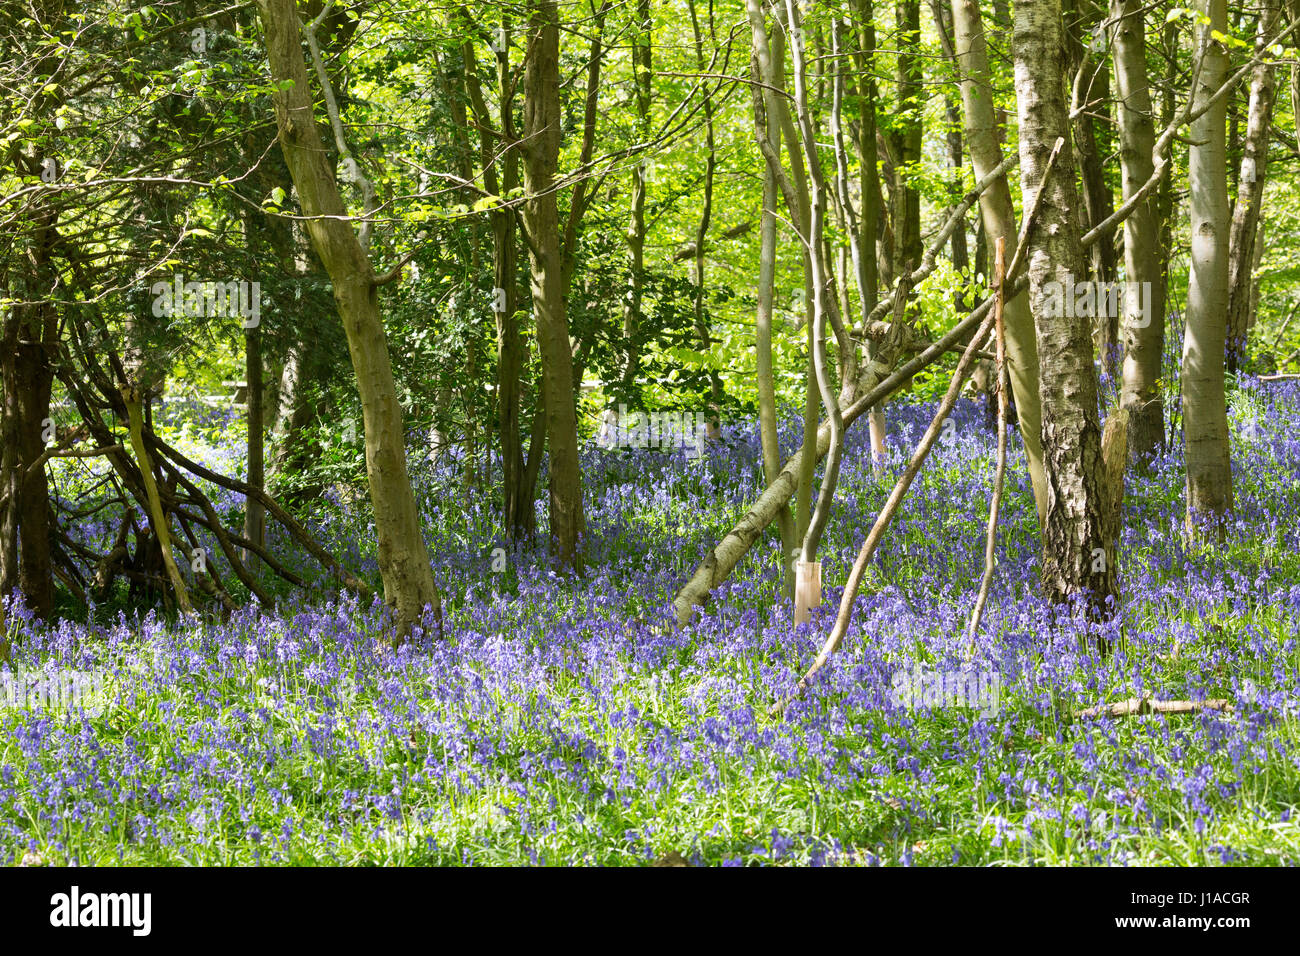 Meopham, Kent, UK. 19th April, 2017. Bluebells are in full bloom at this country park in Meopham, Kent. Rob Powell/Alamy Live News Stock Photo